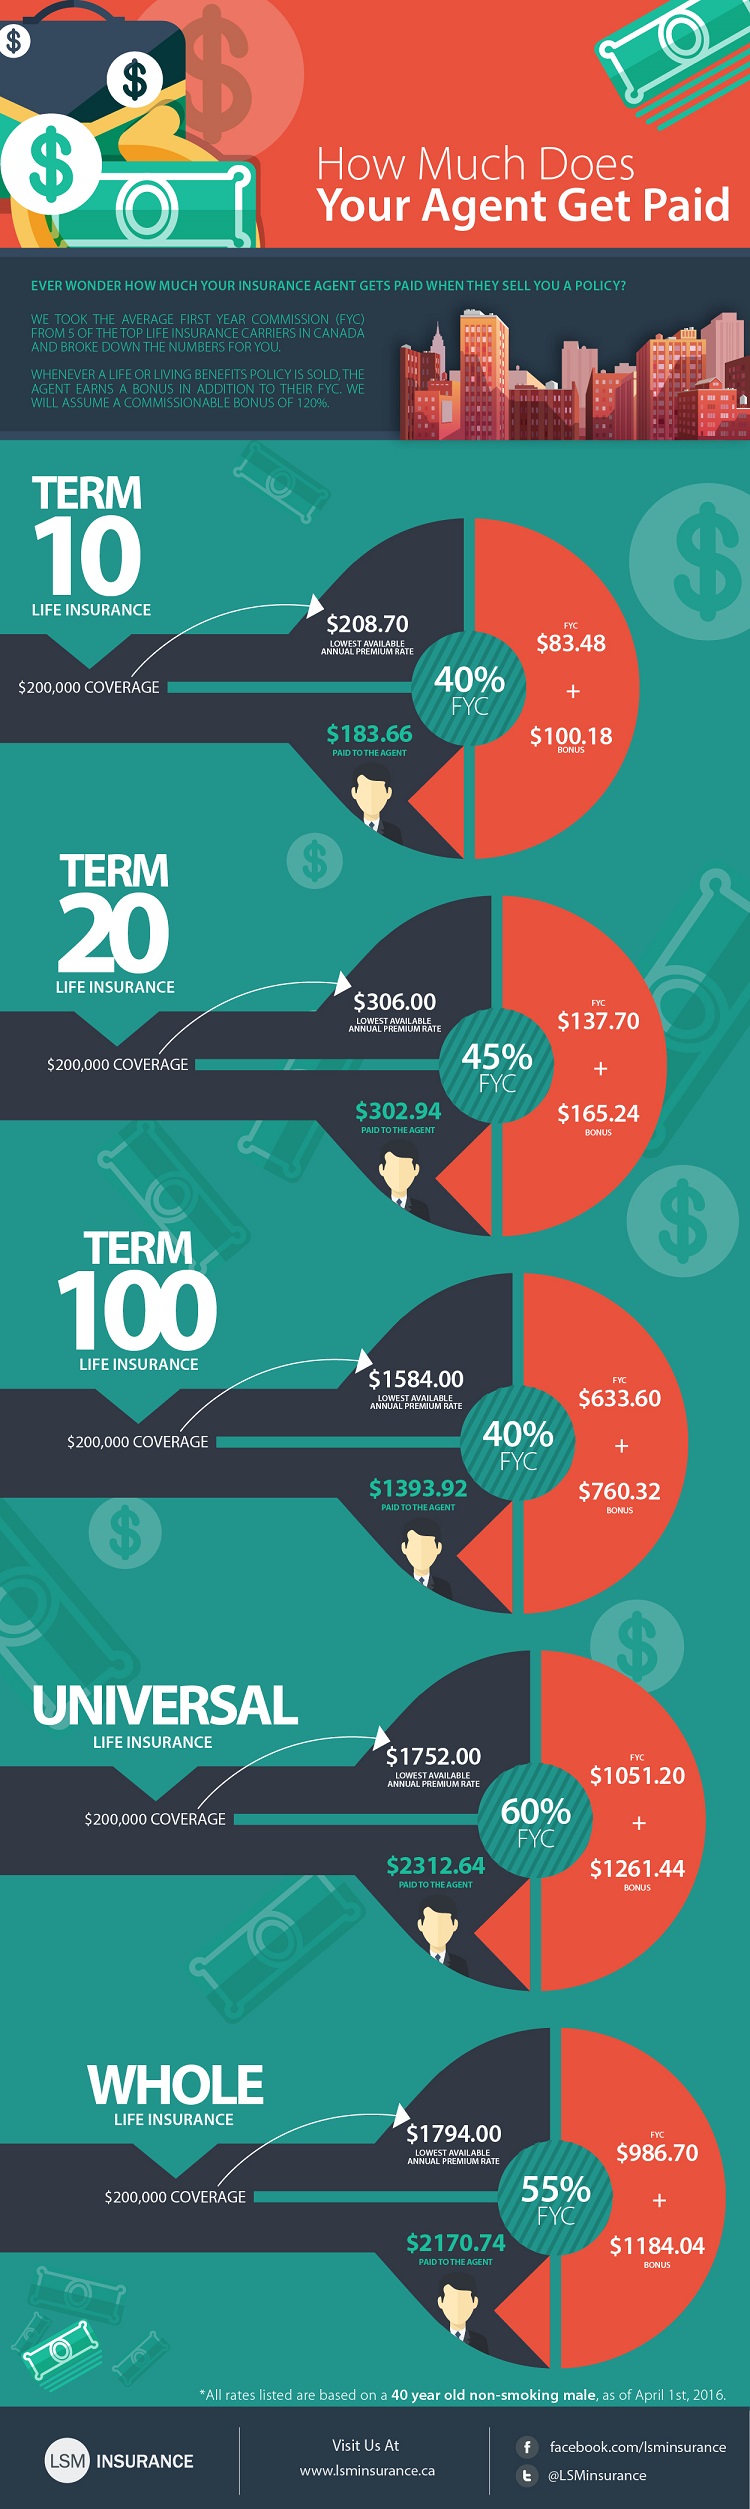 infographic life insurance agent commissions